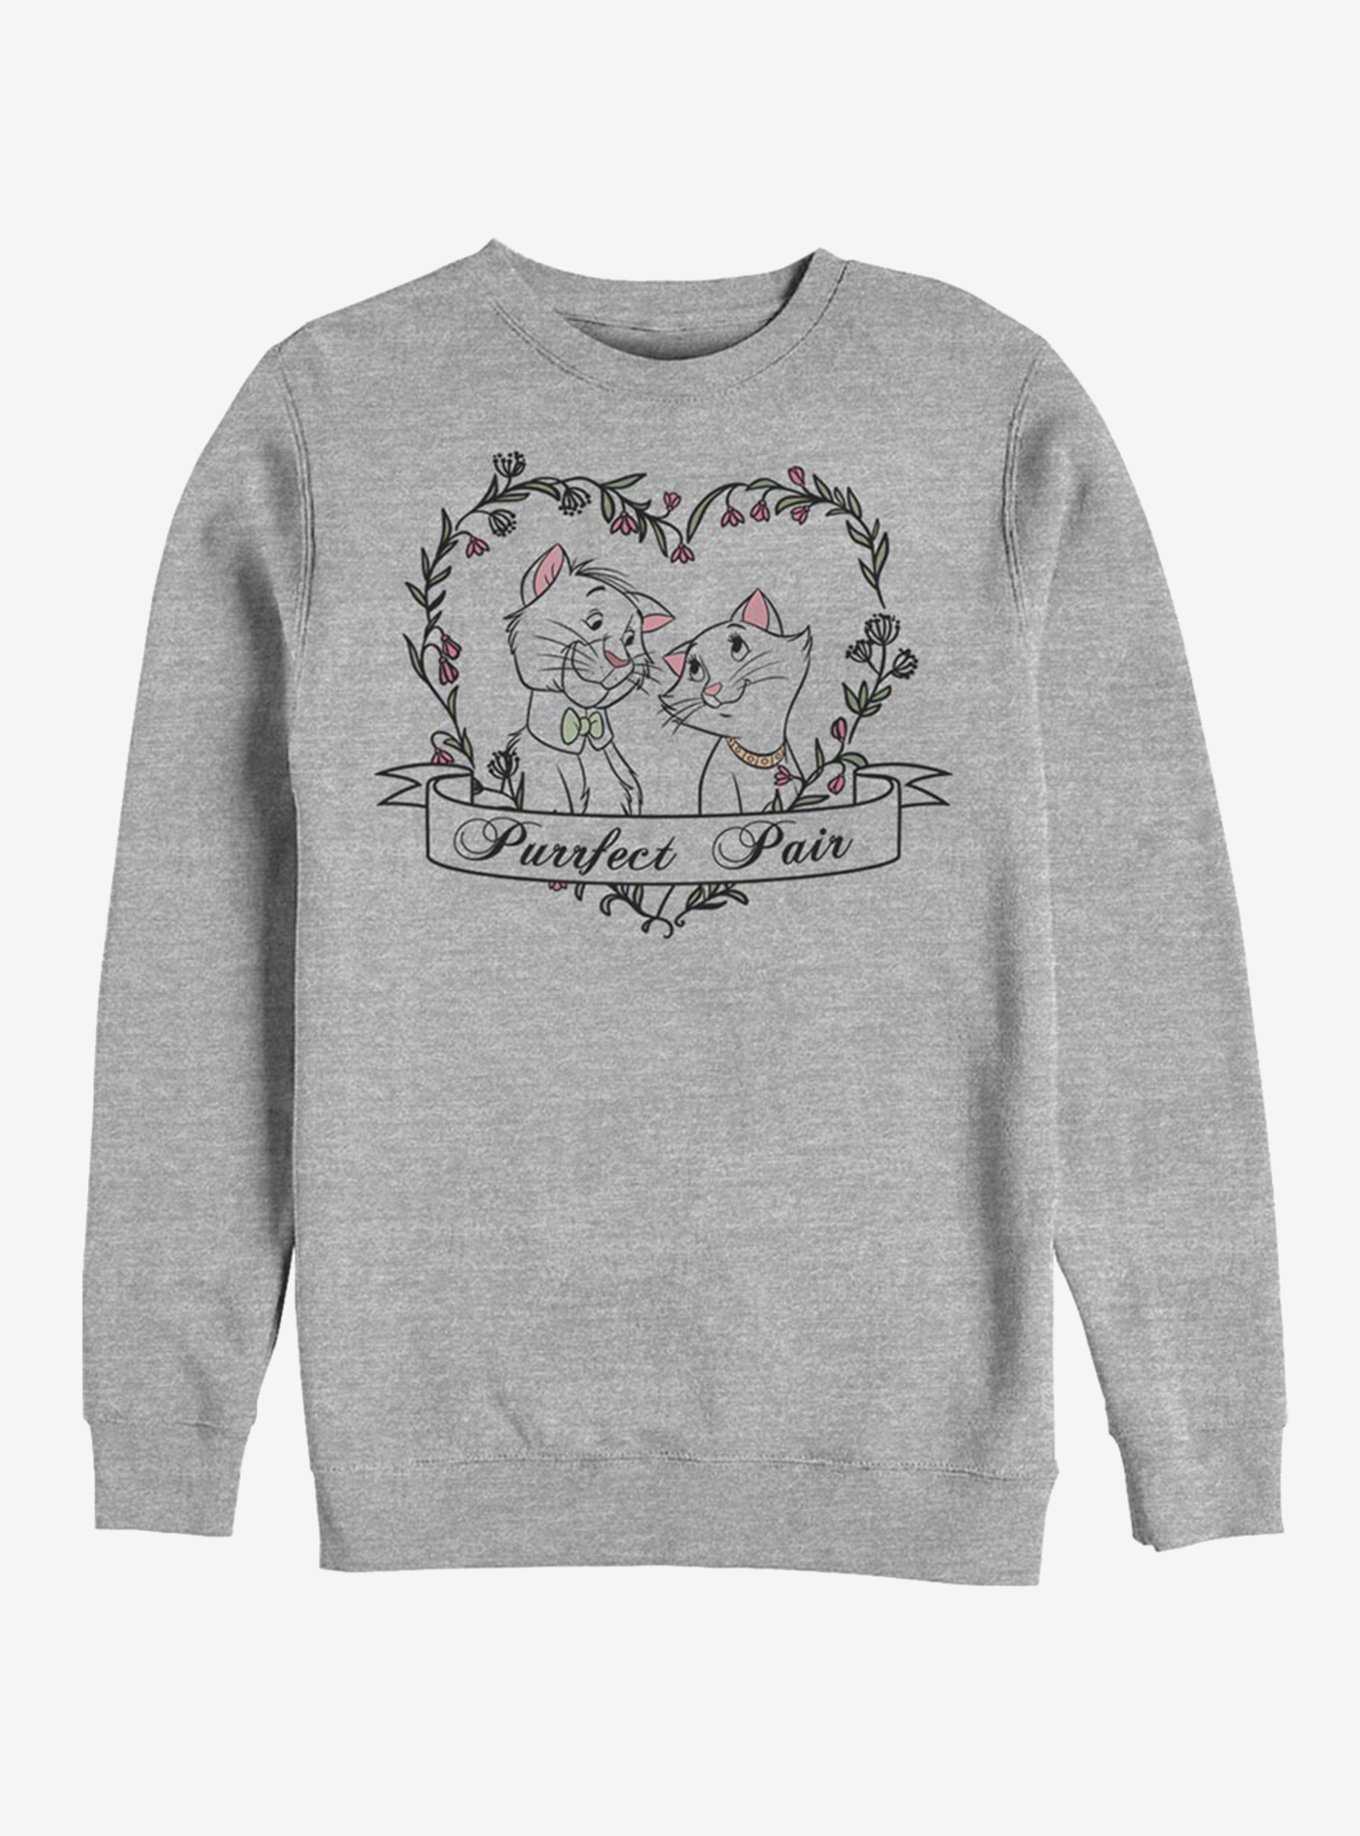 Disney The Aristocats Duchess And O'Malley Purrfect Sweatshirt, , hi-res